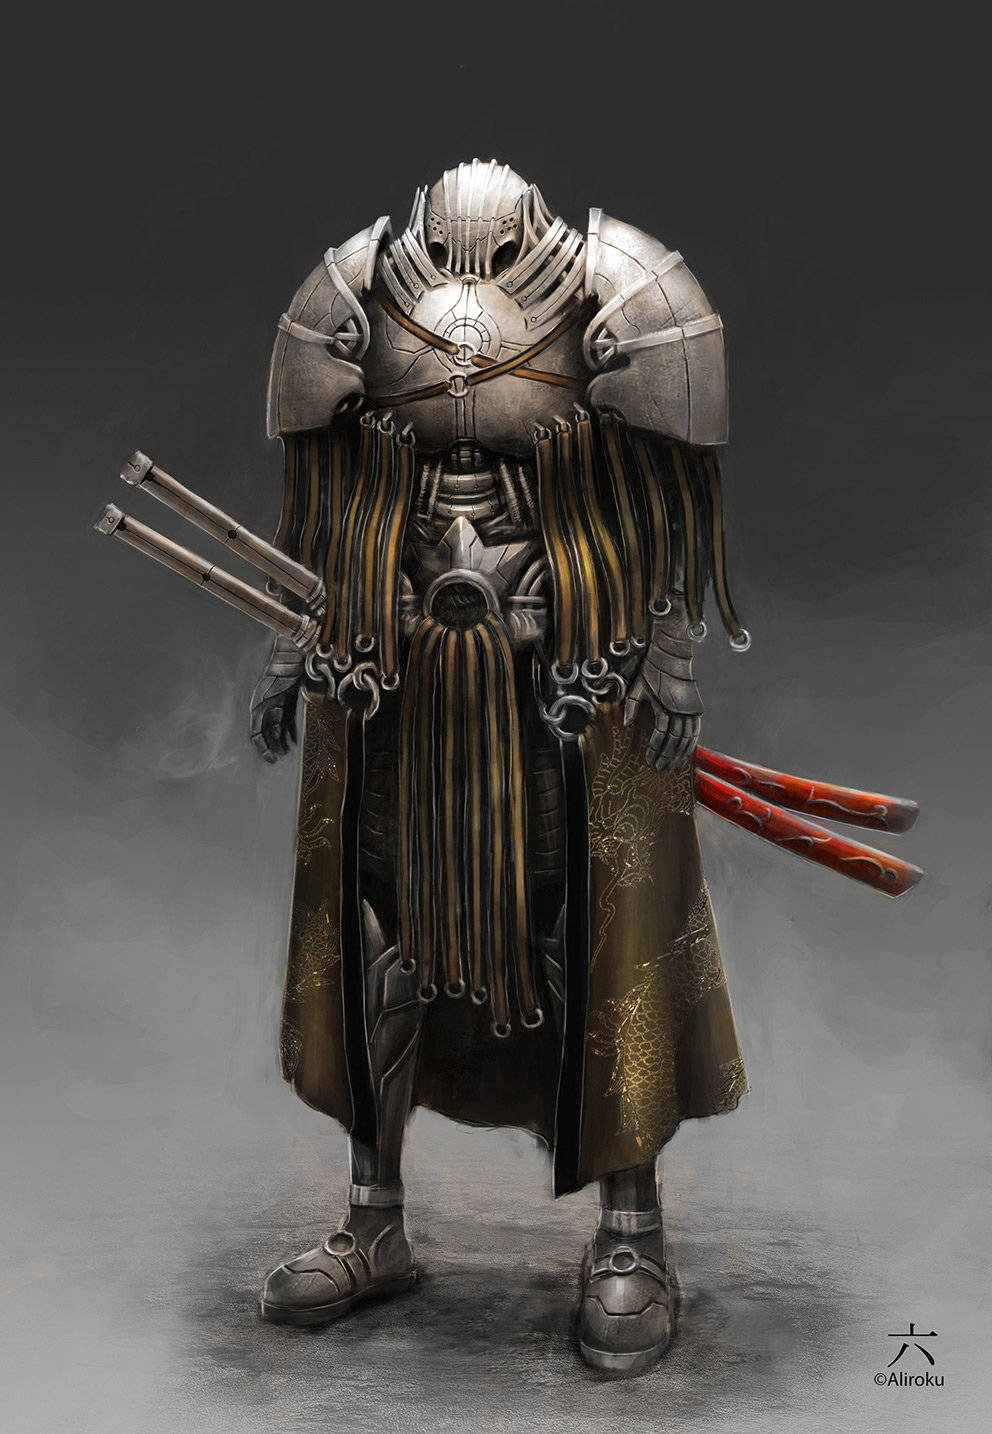 A powerful samurai is depicted in this warrior art. Wallpaper